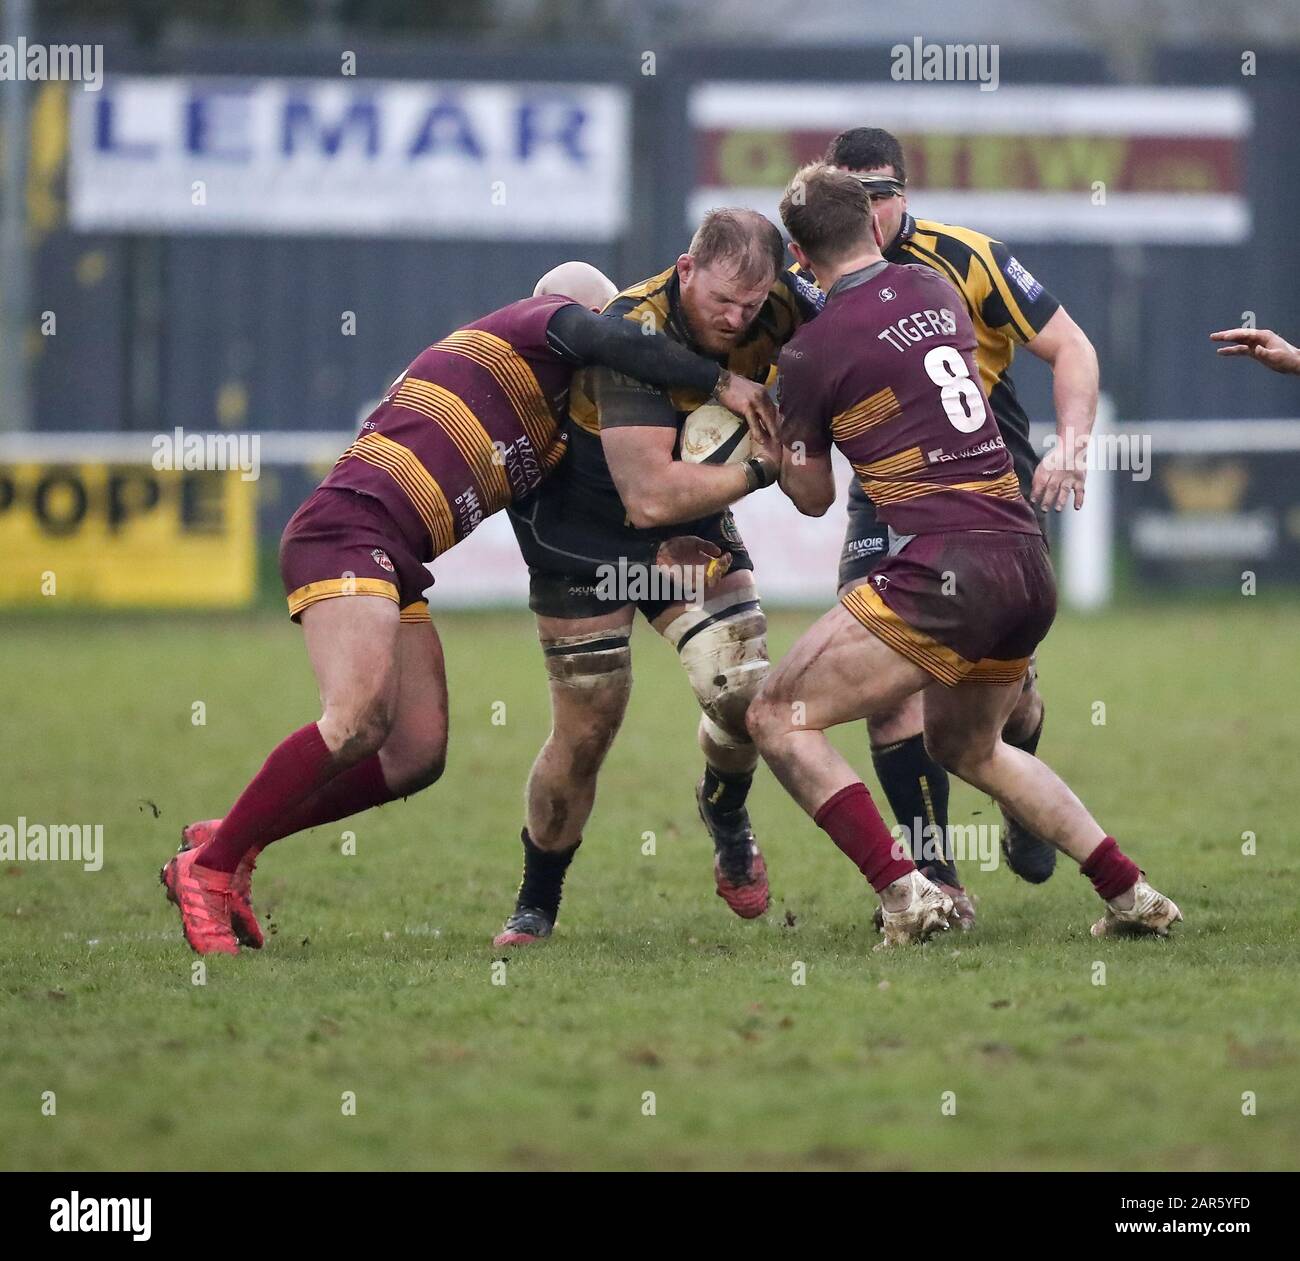 25.01.2020, Hinckley, Leicester, England. Rugby Union, Hinckley rfc v Sedgley Park rfc.   Andrew Weaver of Hinckley takes the ball into contact during the RFU National League 2 North (NL2N) game played at the Leicester  Road Stadium. Stock Photo